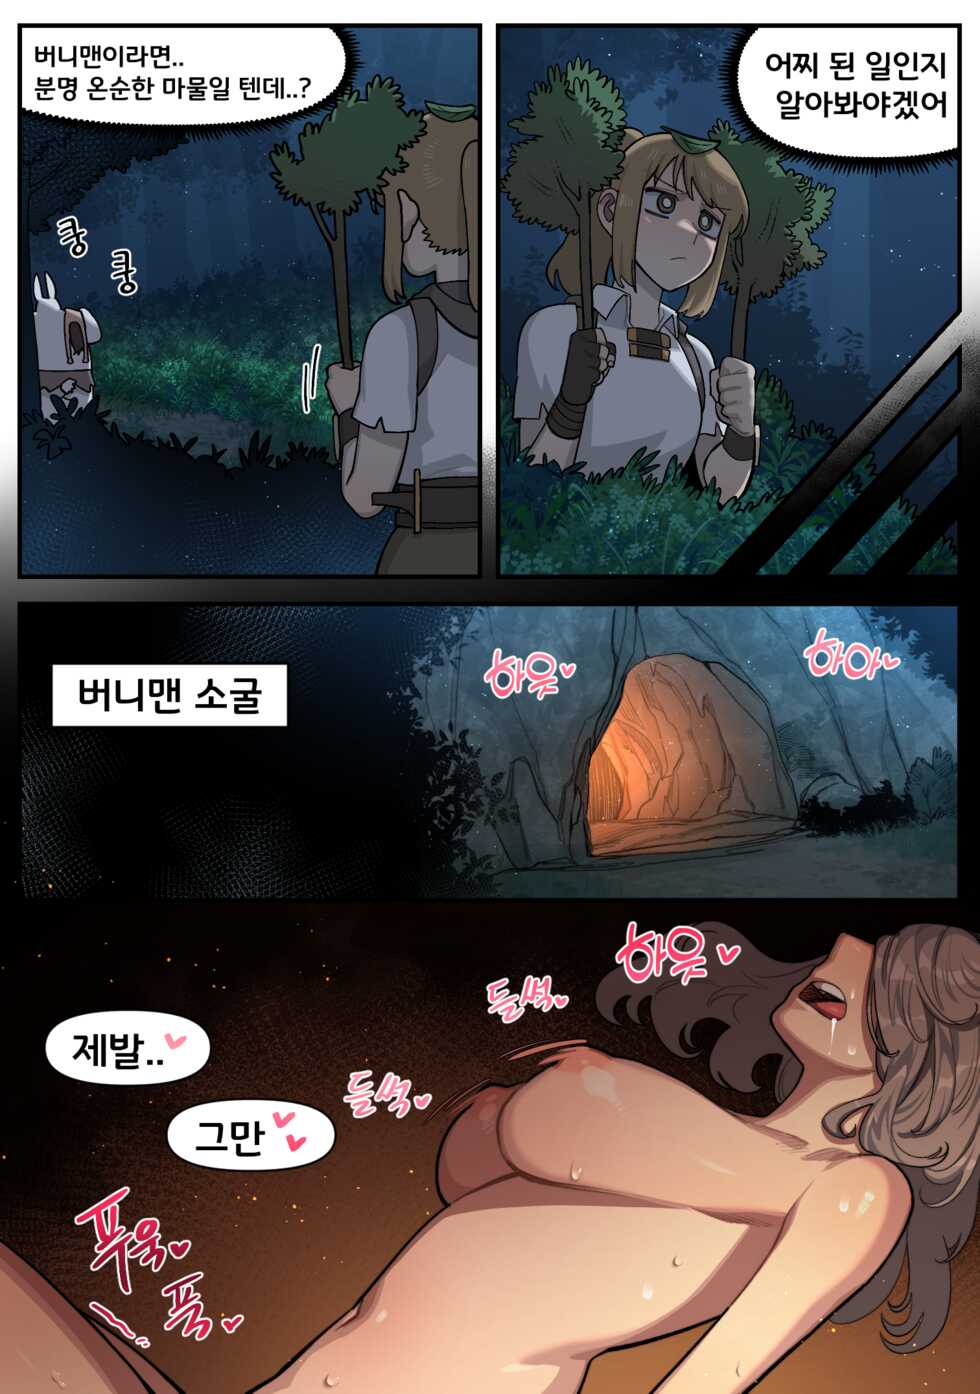 [6no1] Bunnyman Hunting Mission Part 1 (22.06) [Korean] [Uncensored] - Page 5